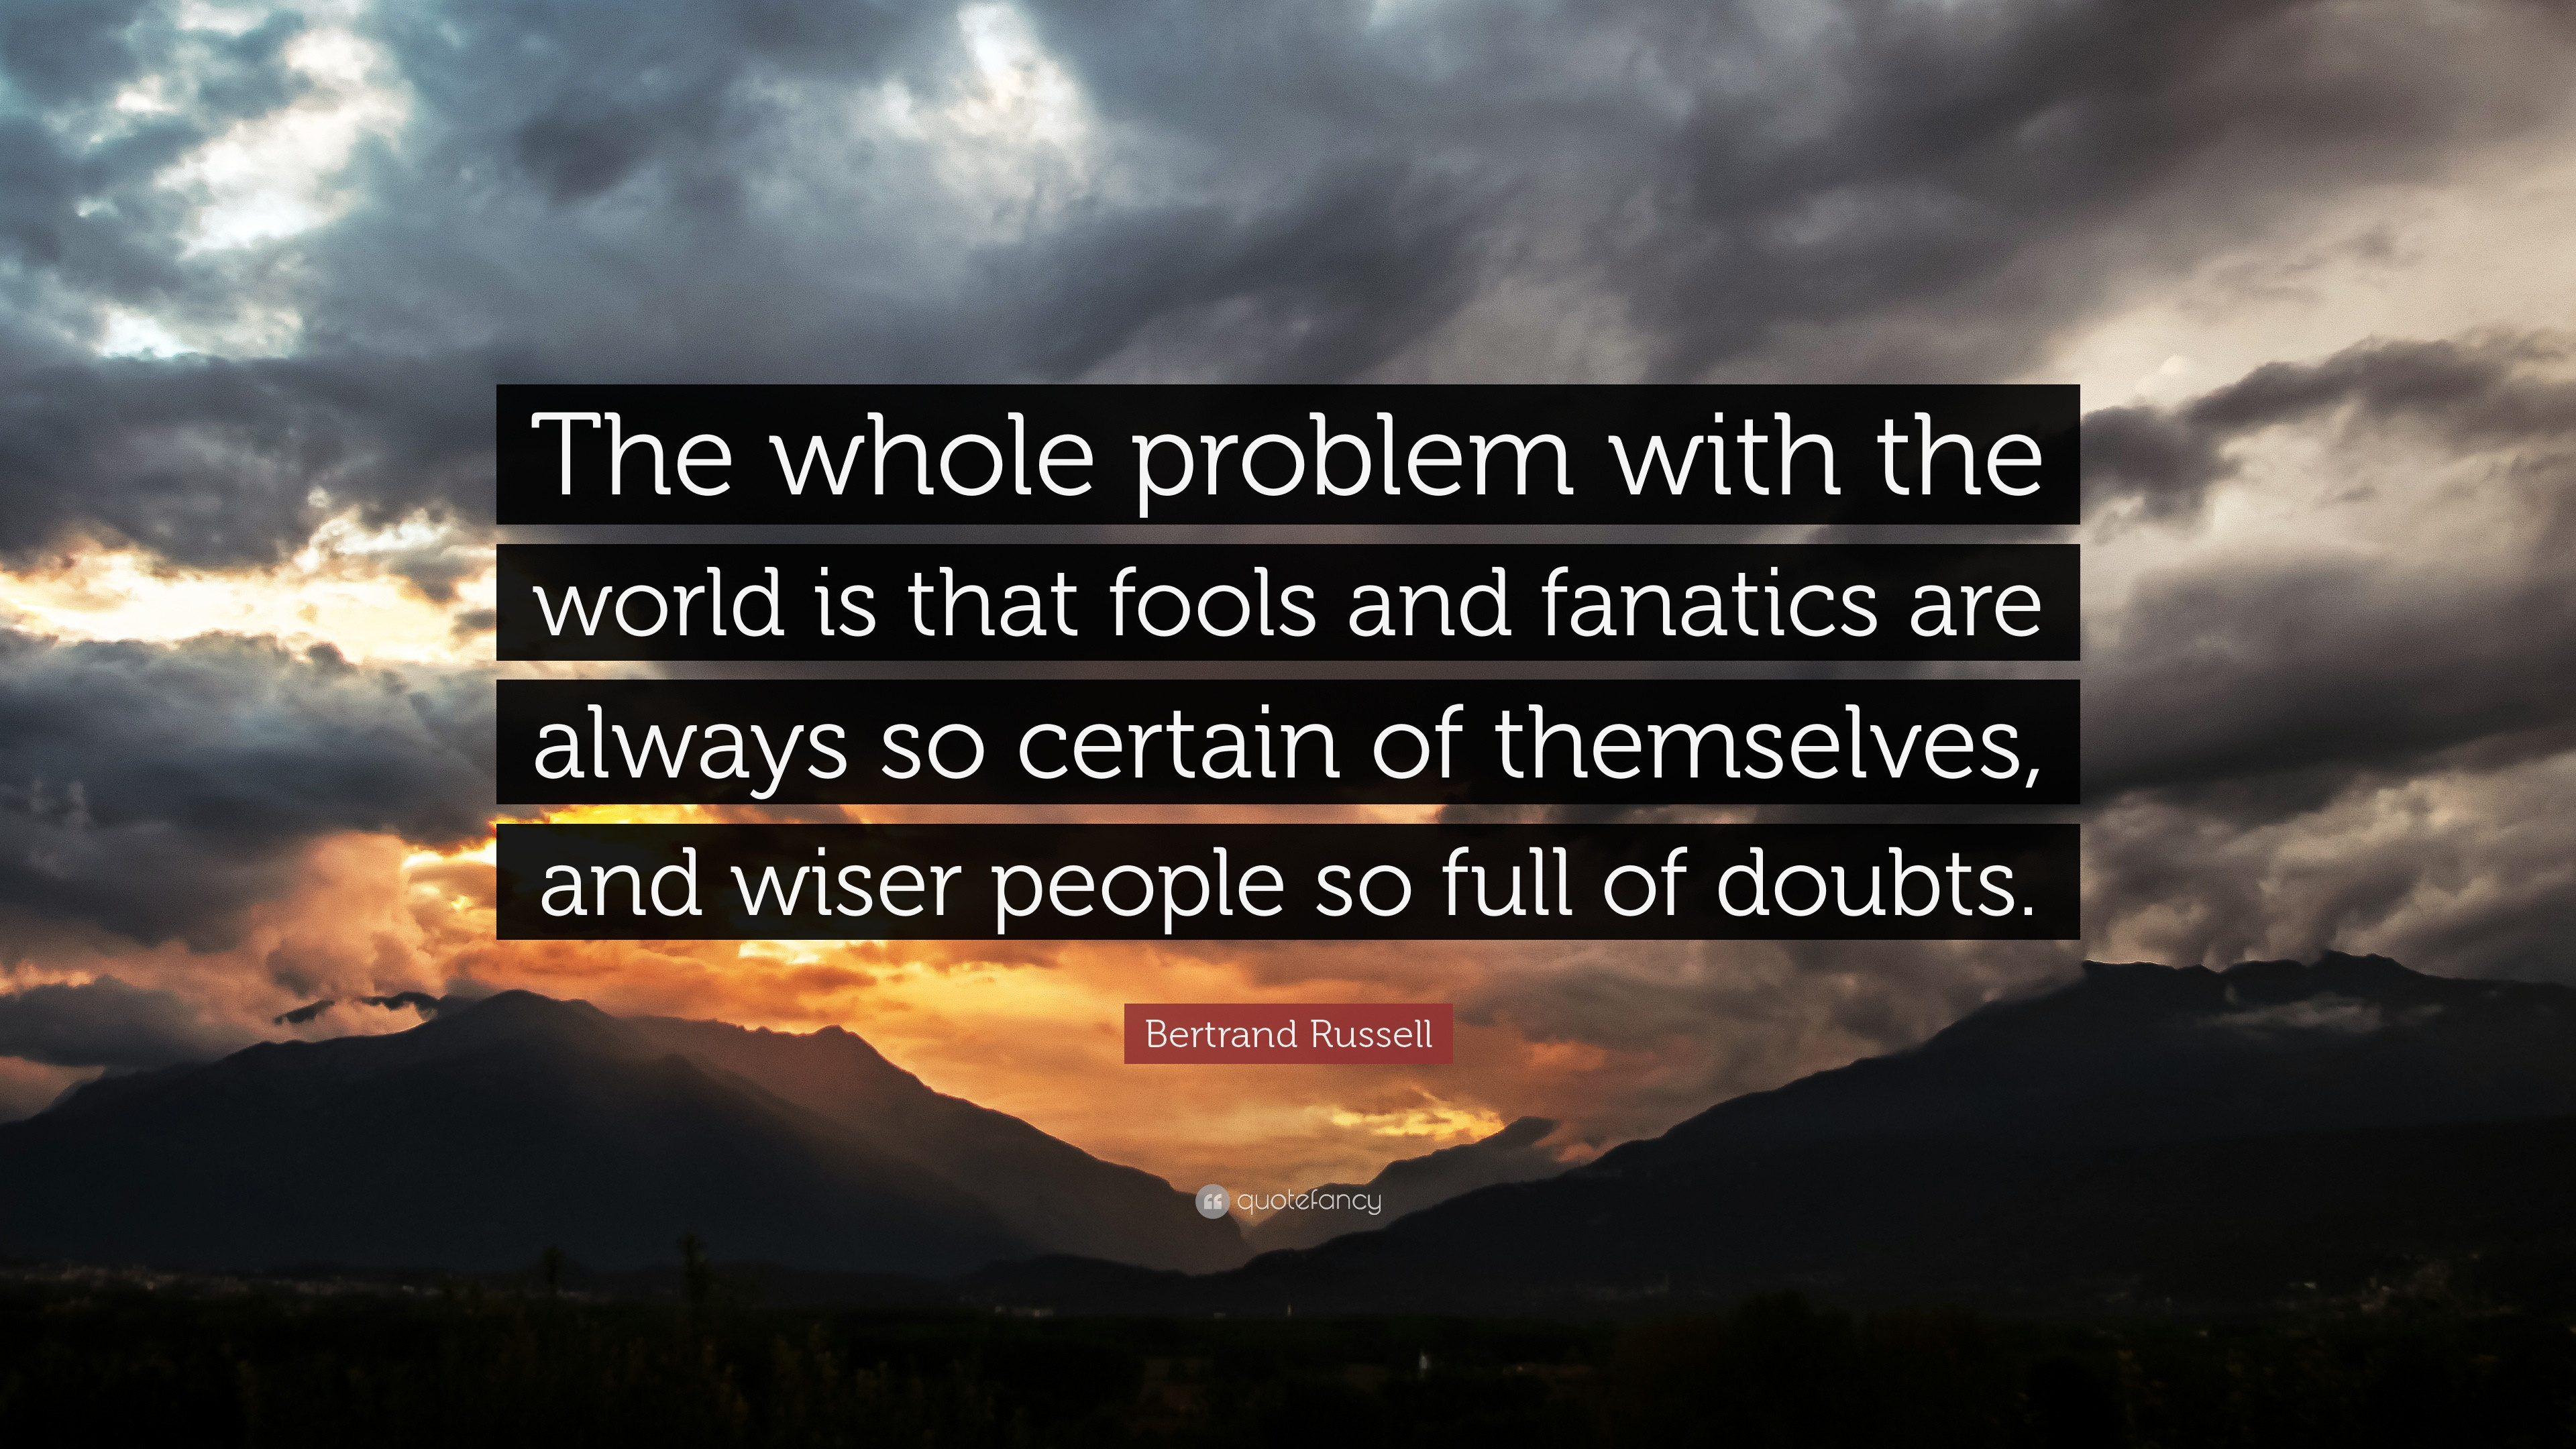 18567-Bertrand-Russell-Quote-The-whole-problem-with-the-world-is-that.jpg